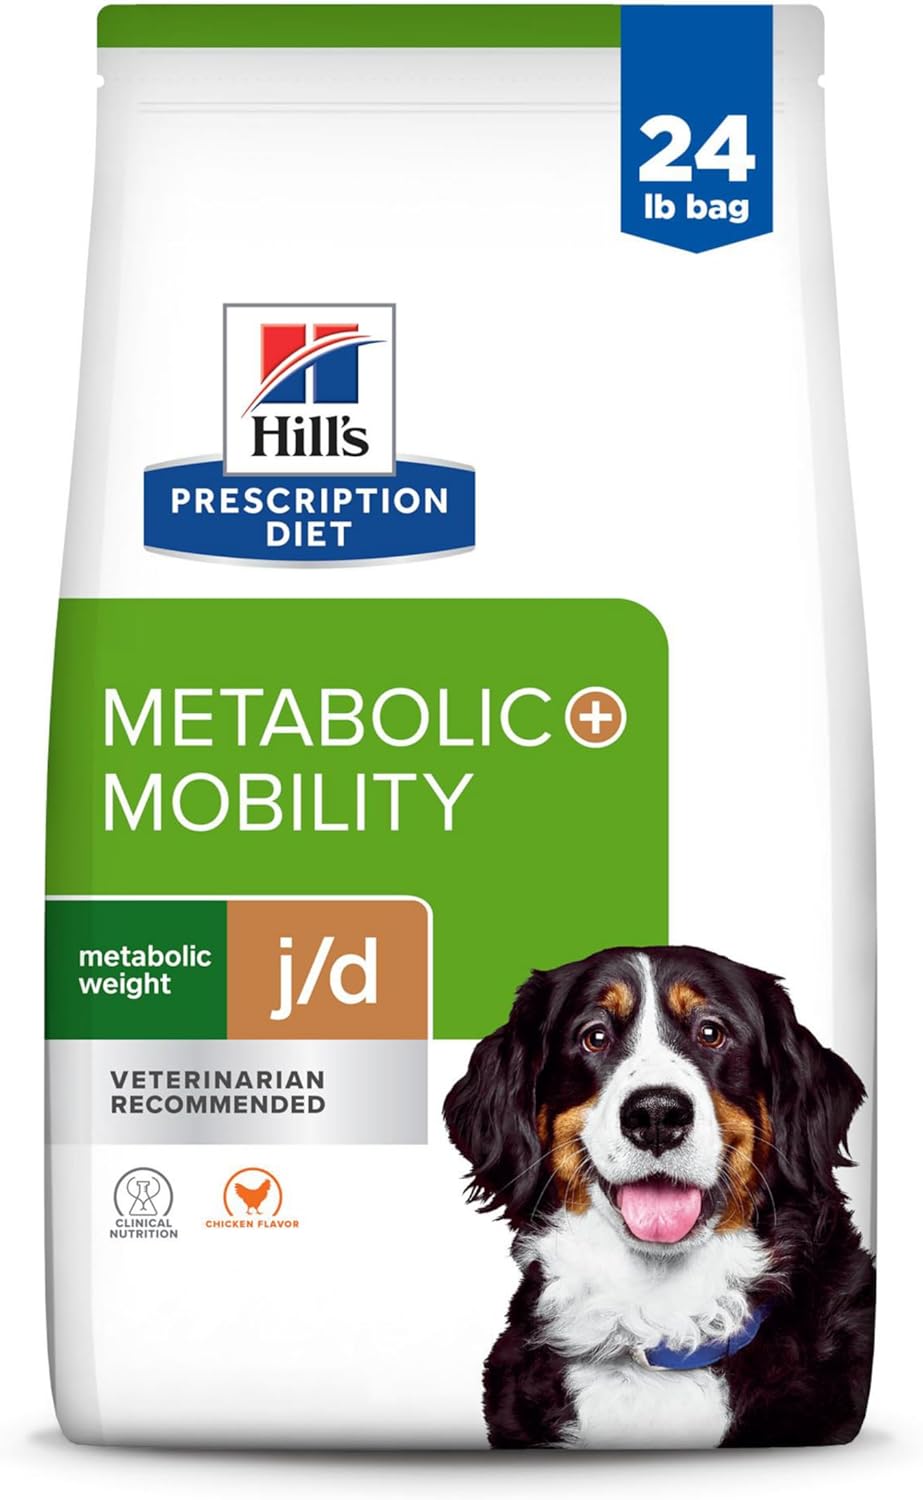 Hill's Prescription Diet Metabolic + Mobility, Weight + j/d Joint Care Chicken Flavor Dry Dog Food, Veterinary Diet, 24 lb. Bag